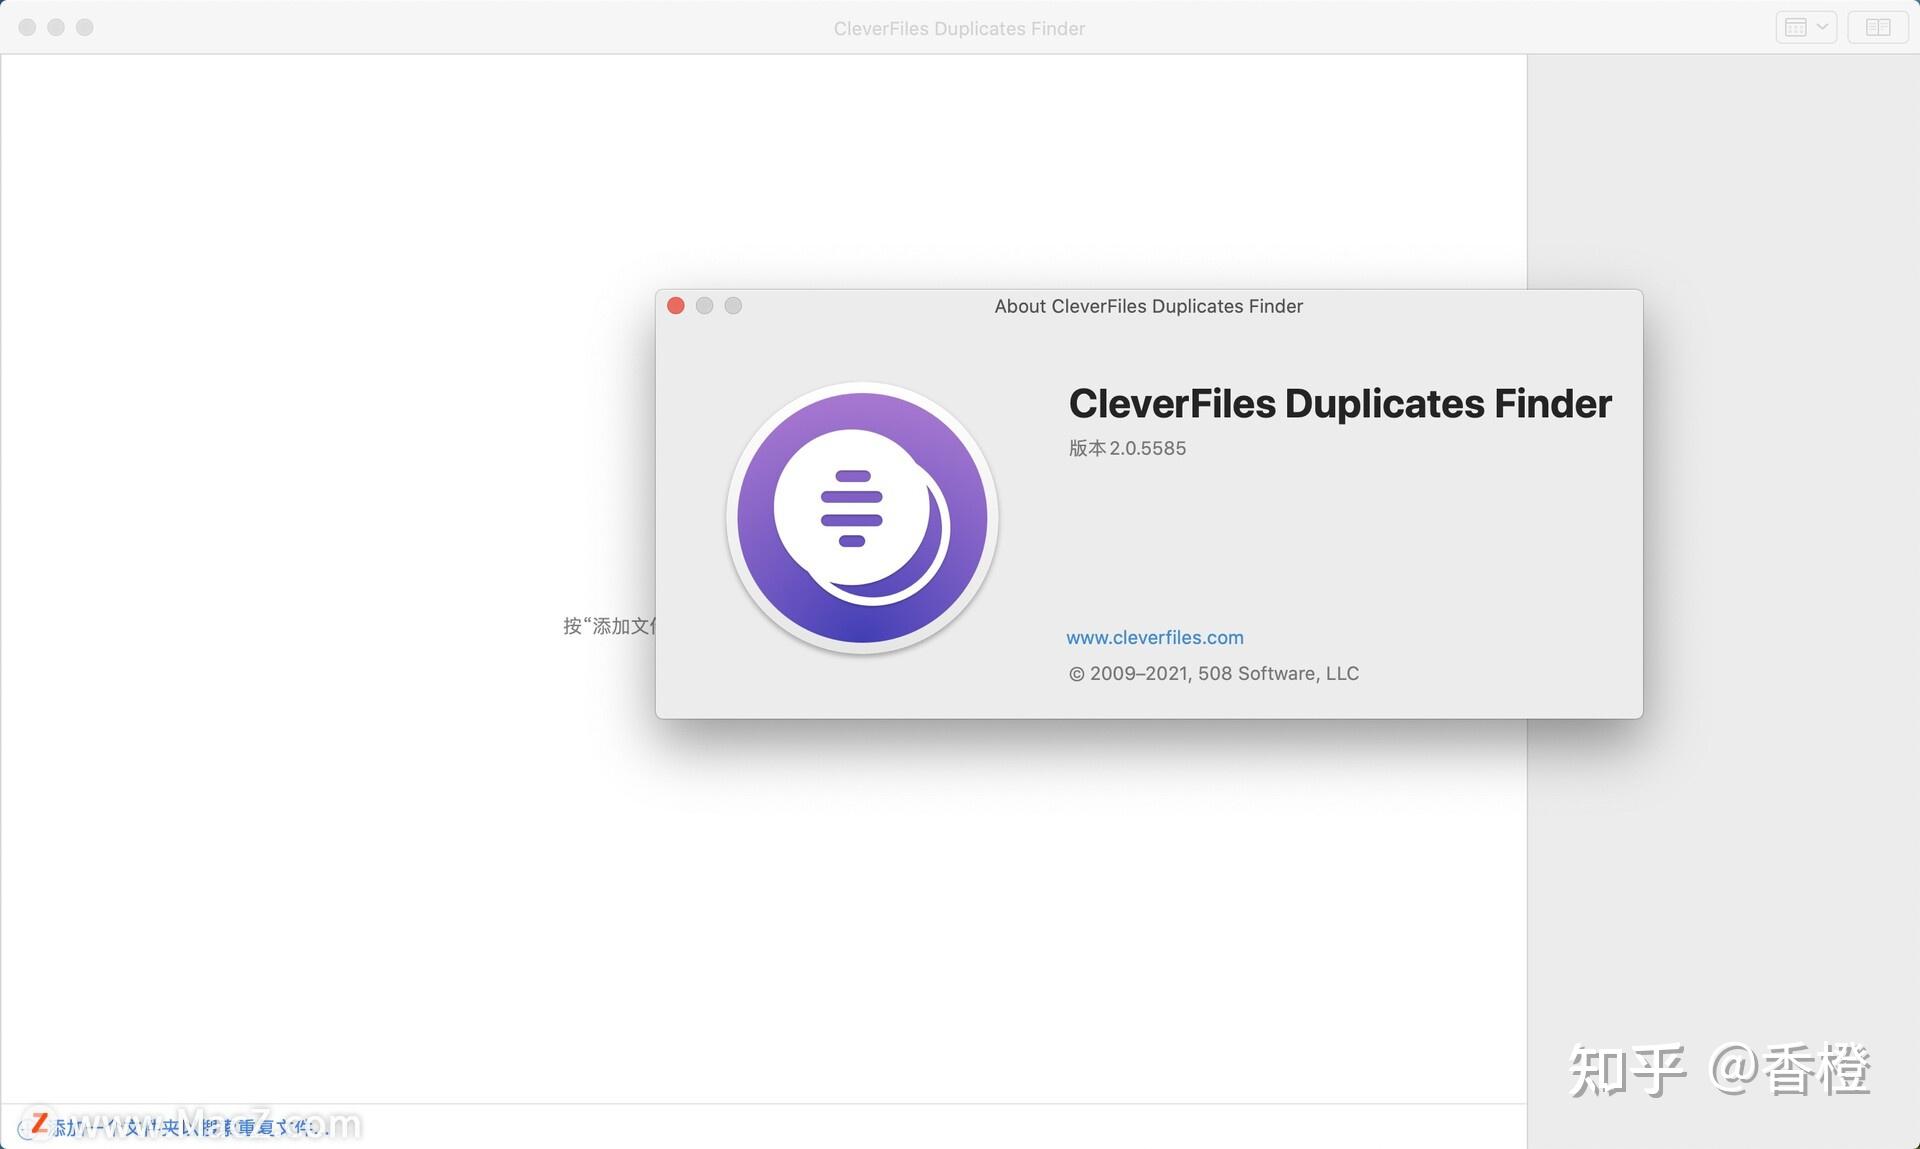 cleverfiles duplicates finder